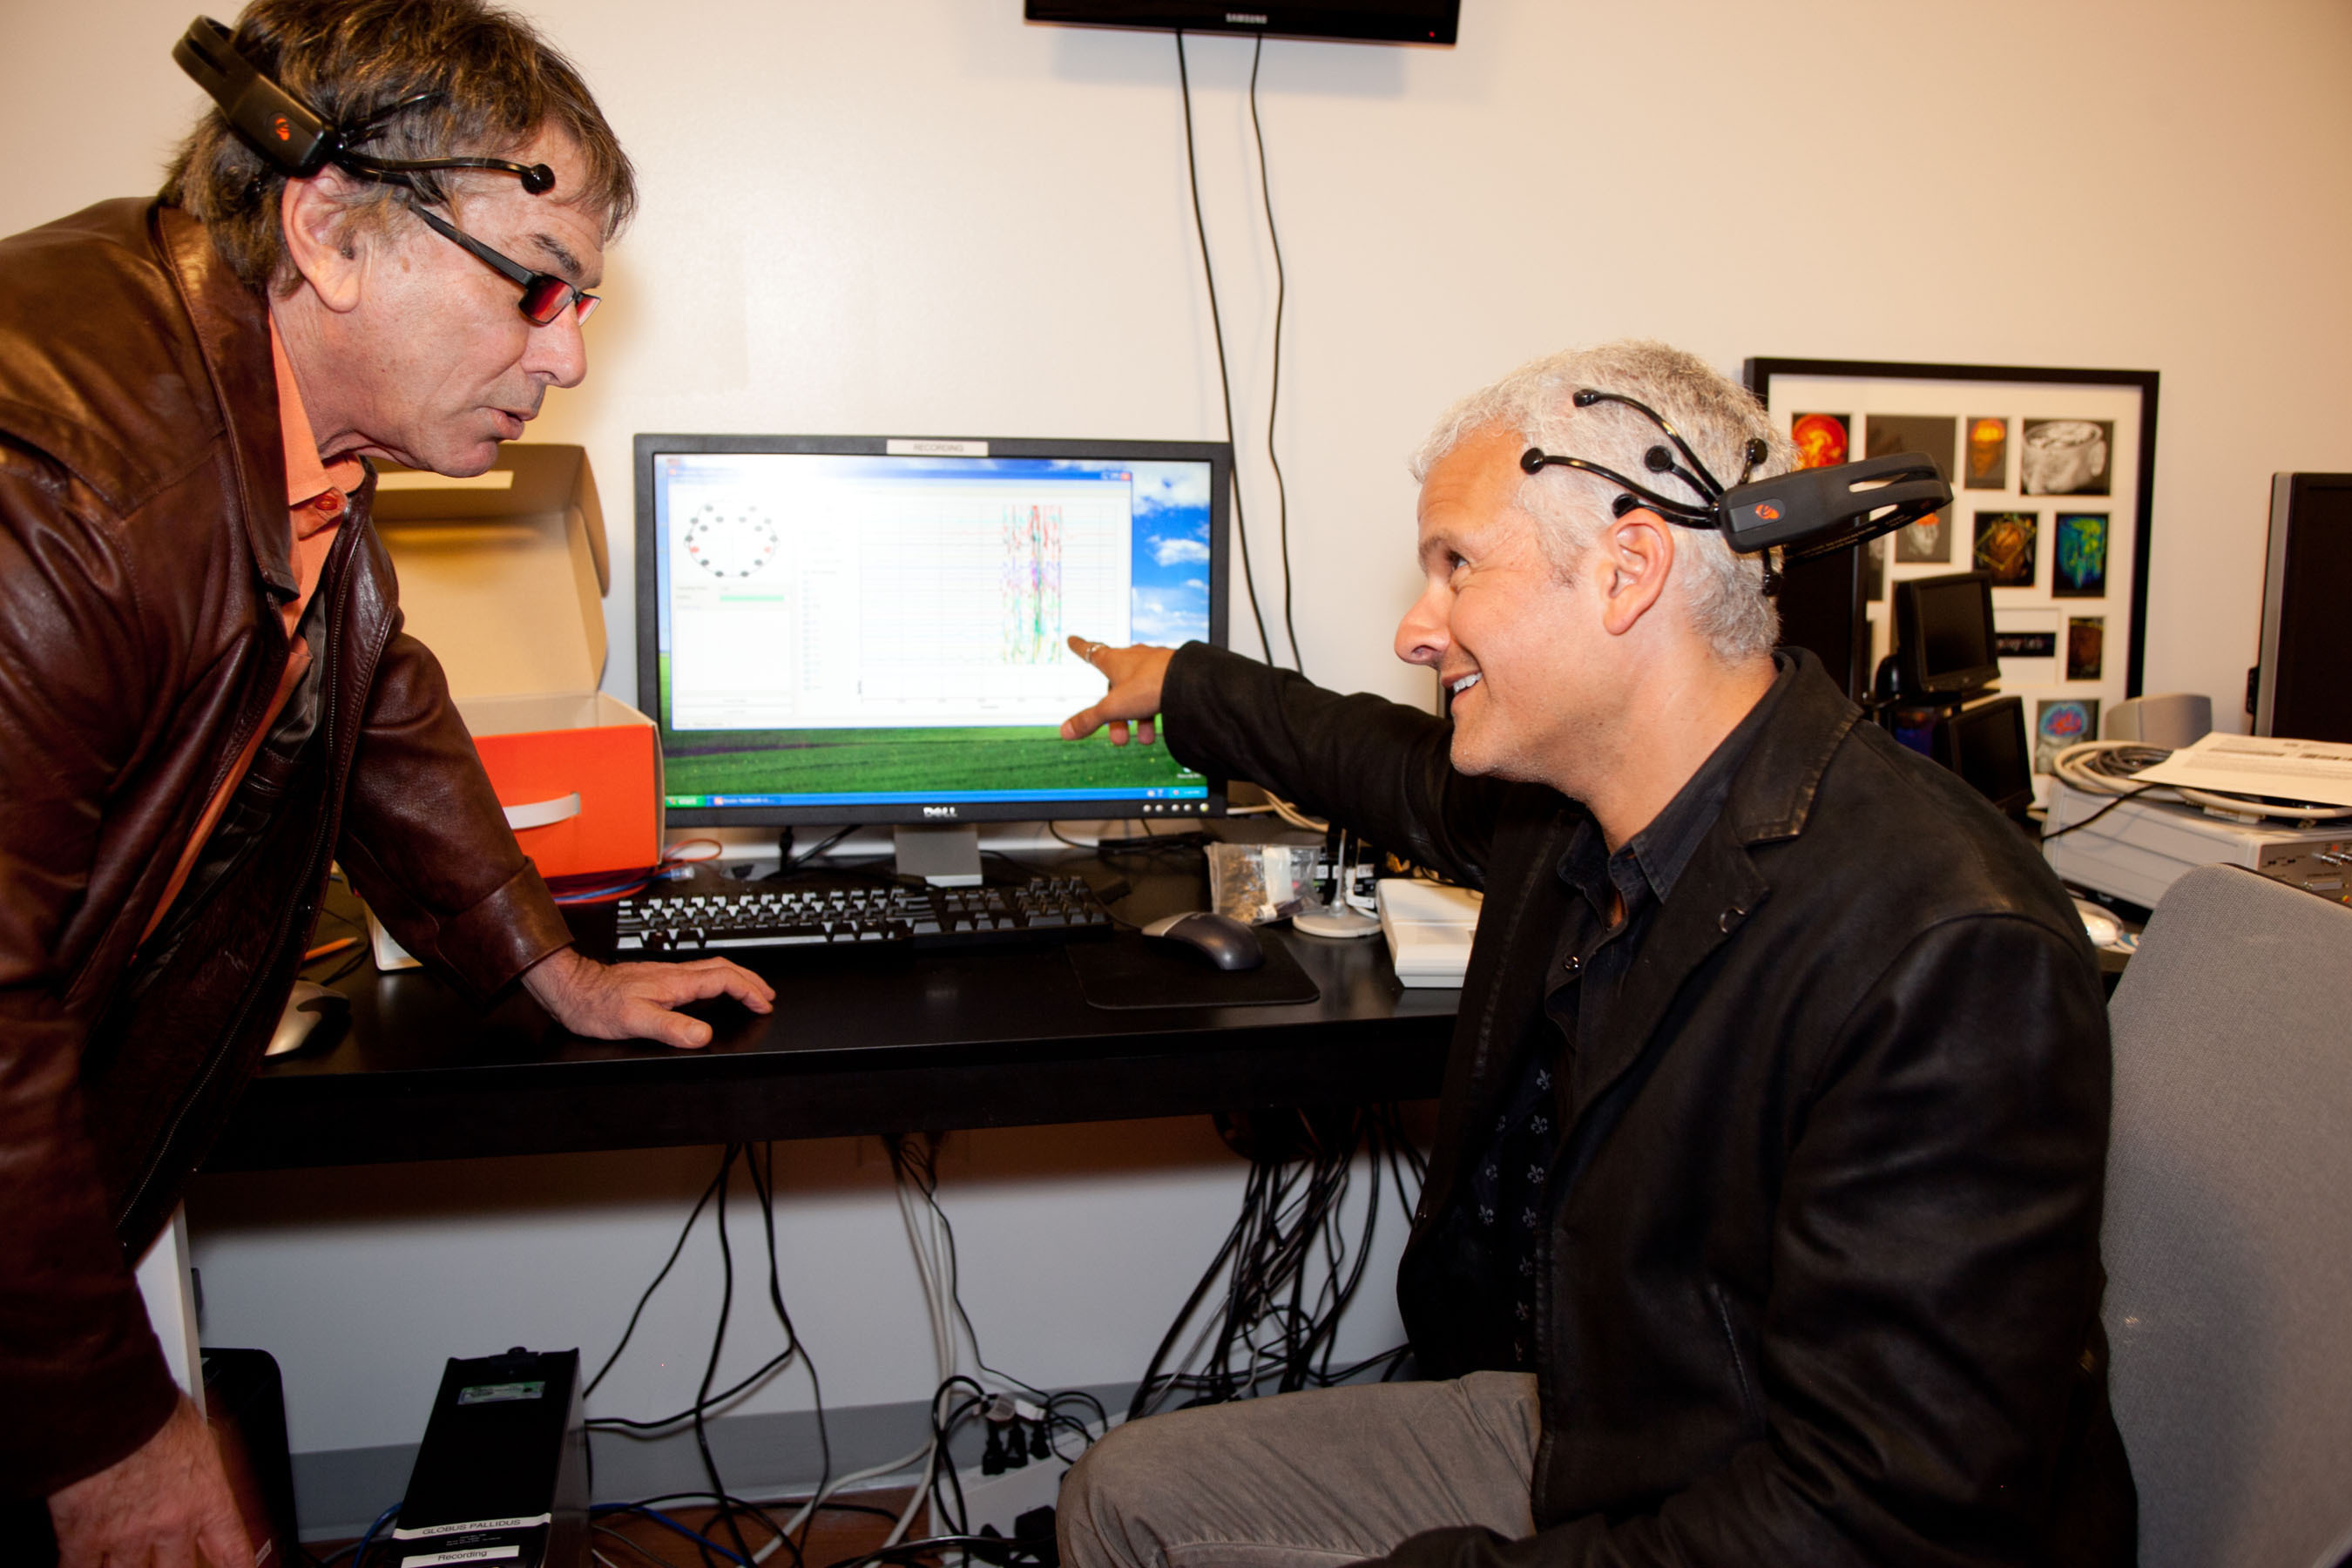 RHYTHM CENTRAL: Mickey Hart and Dr. Adam Gazzaley Make History Through Visualizing and Sonifying Brain Activity in Real Time for Live Audience